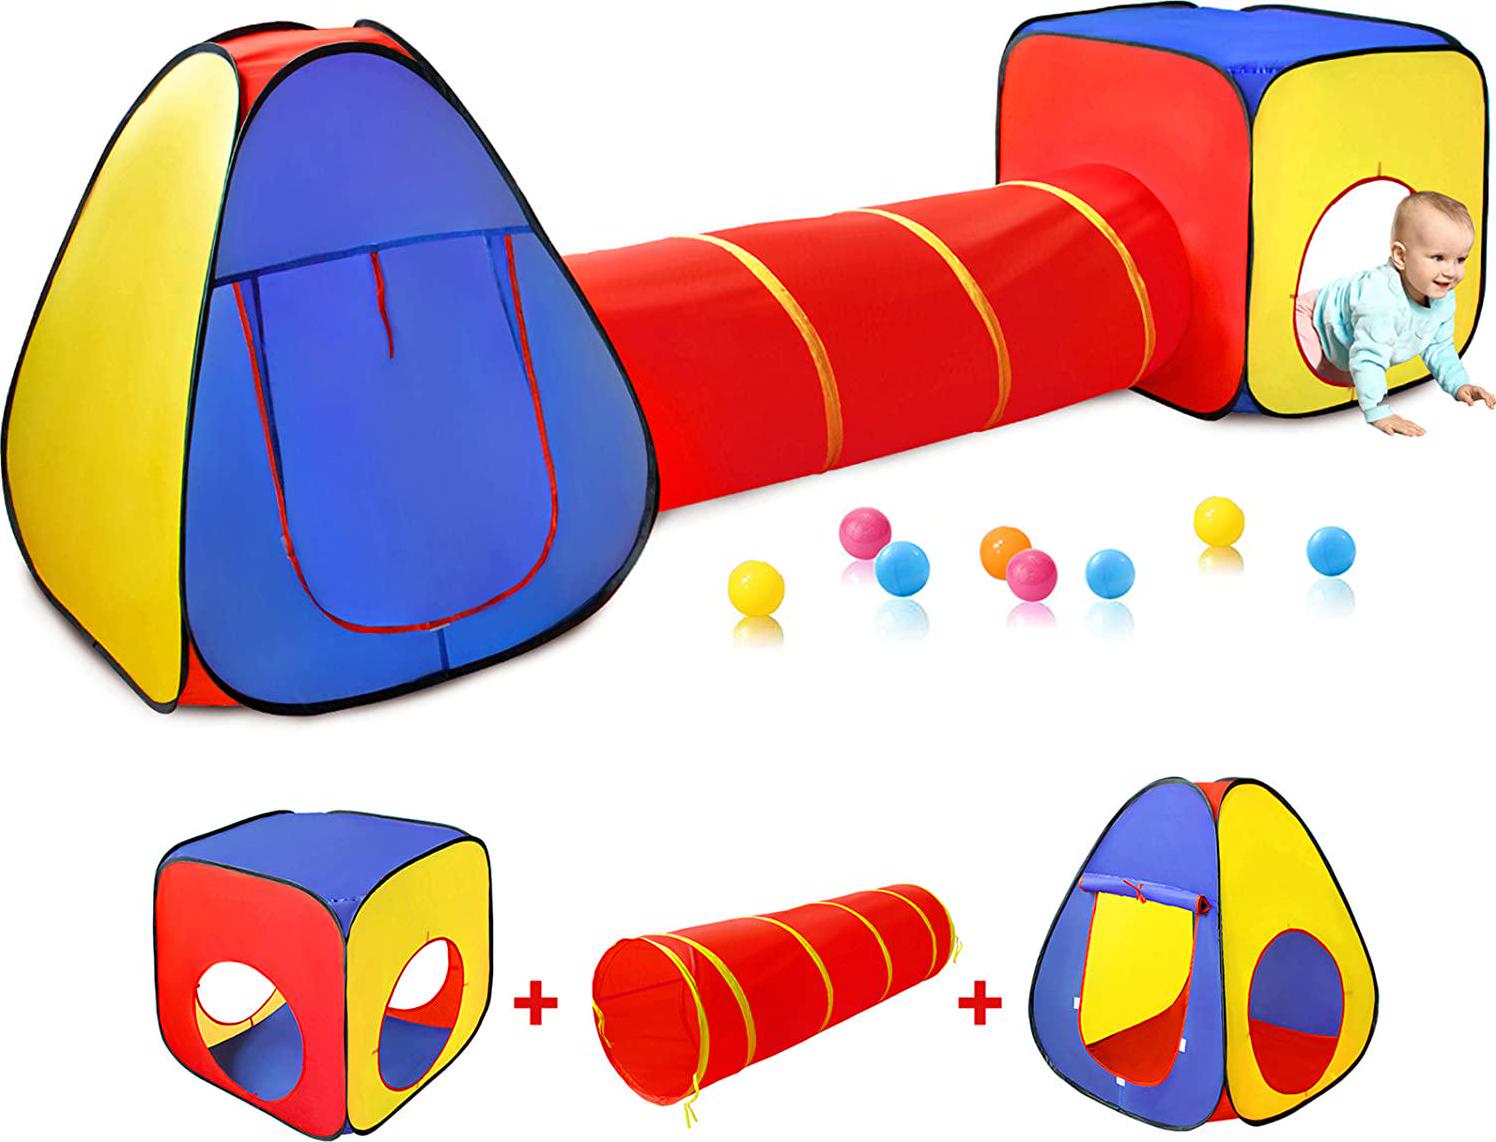 Moncoland, Kids Play Tent with Ball Pit+Crawl Tunnel+Castle Tent, Pop Up Toddlers Playhouse for Boys and Girls Gift, Collapsible Children Play Tent Toy Indoor and Outdoor Games (Colorful Fort)